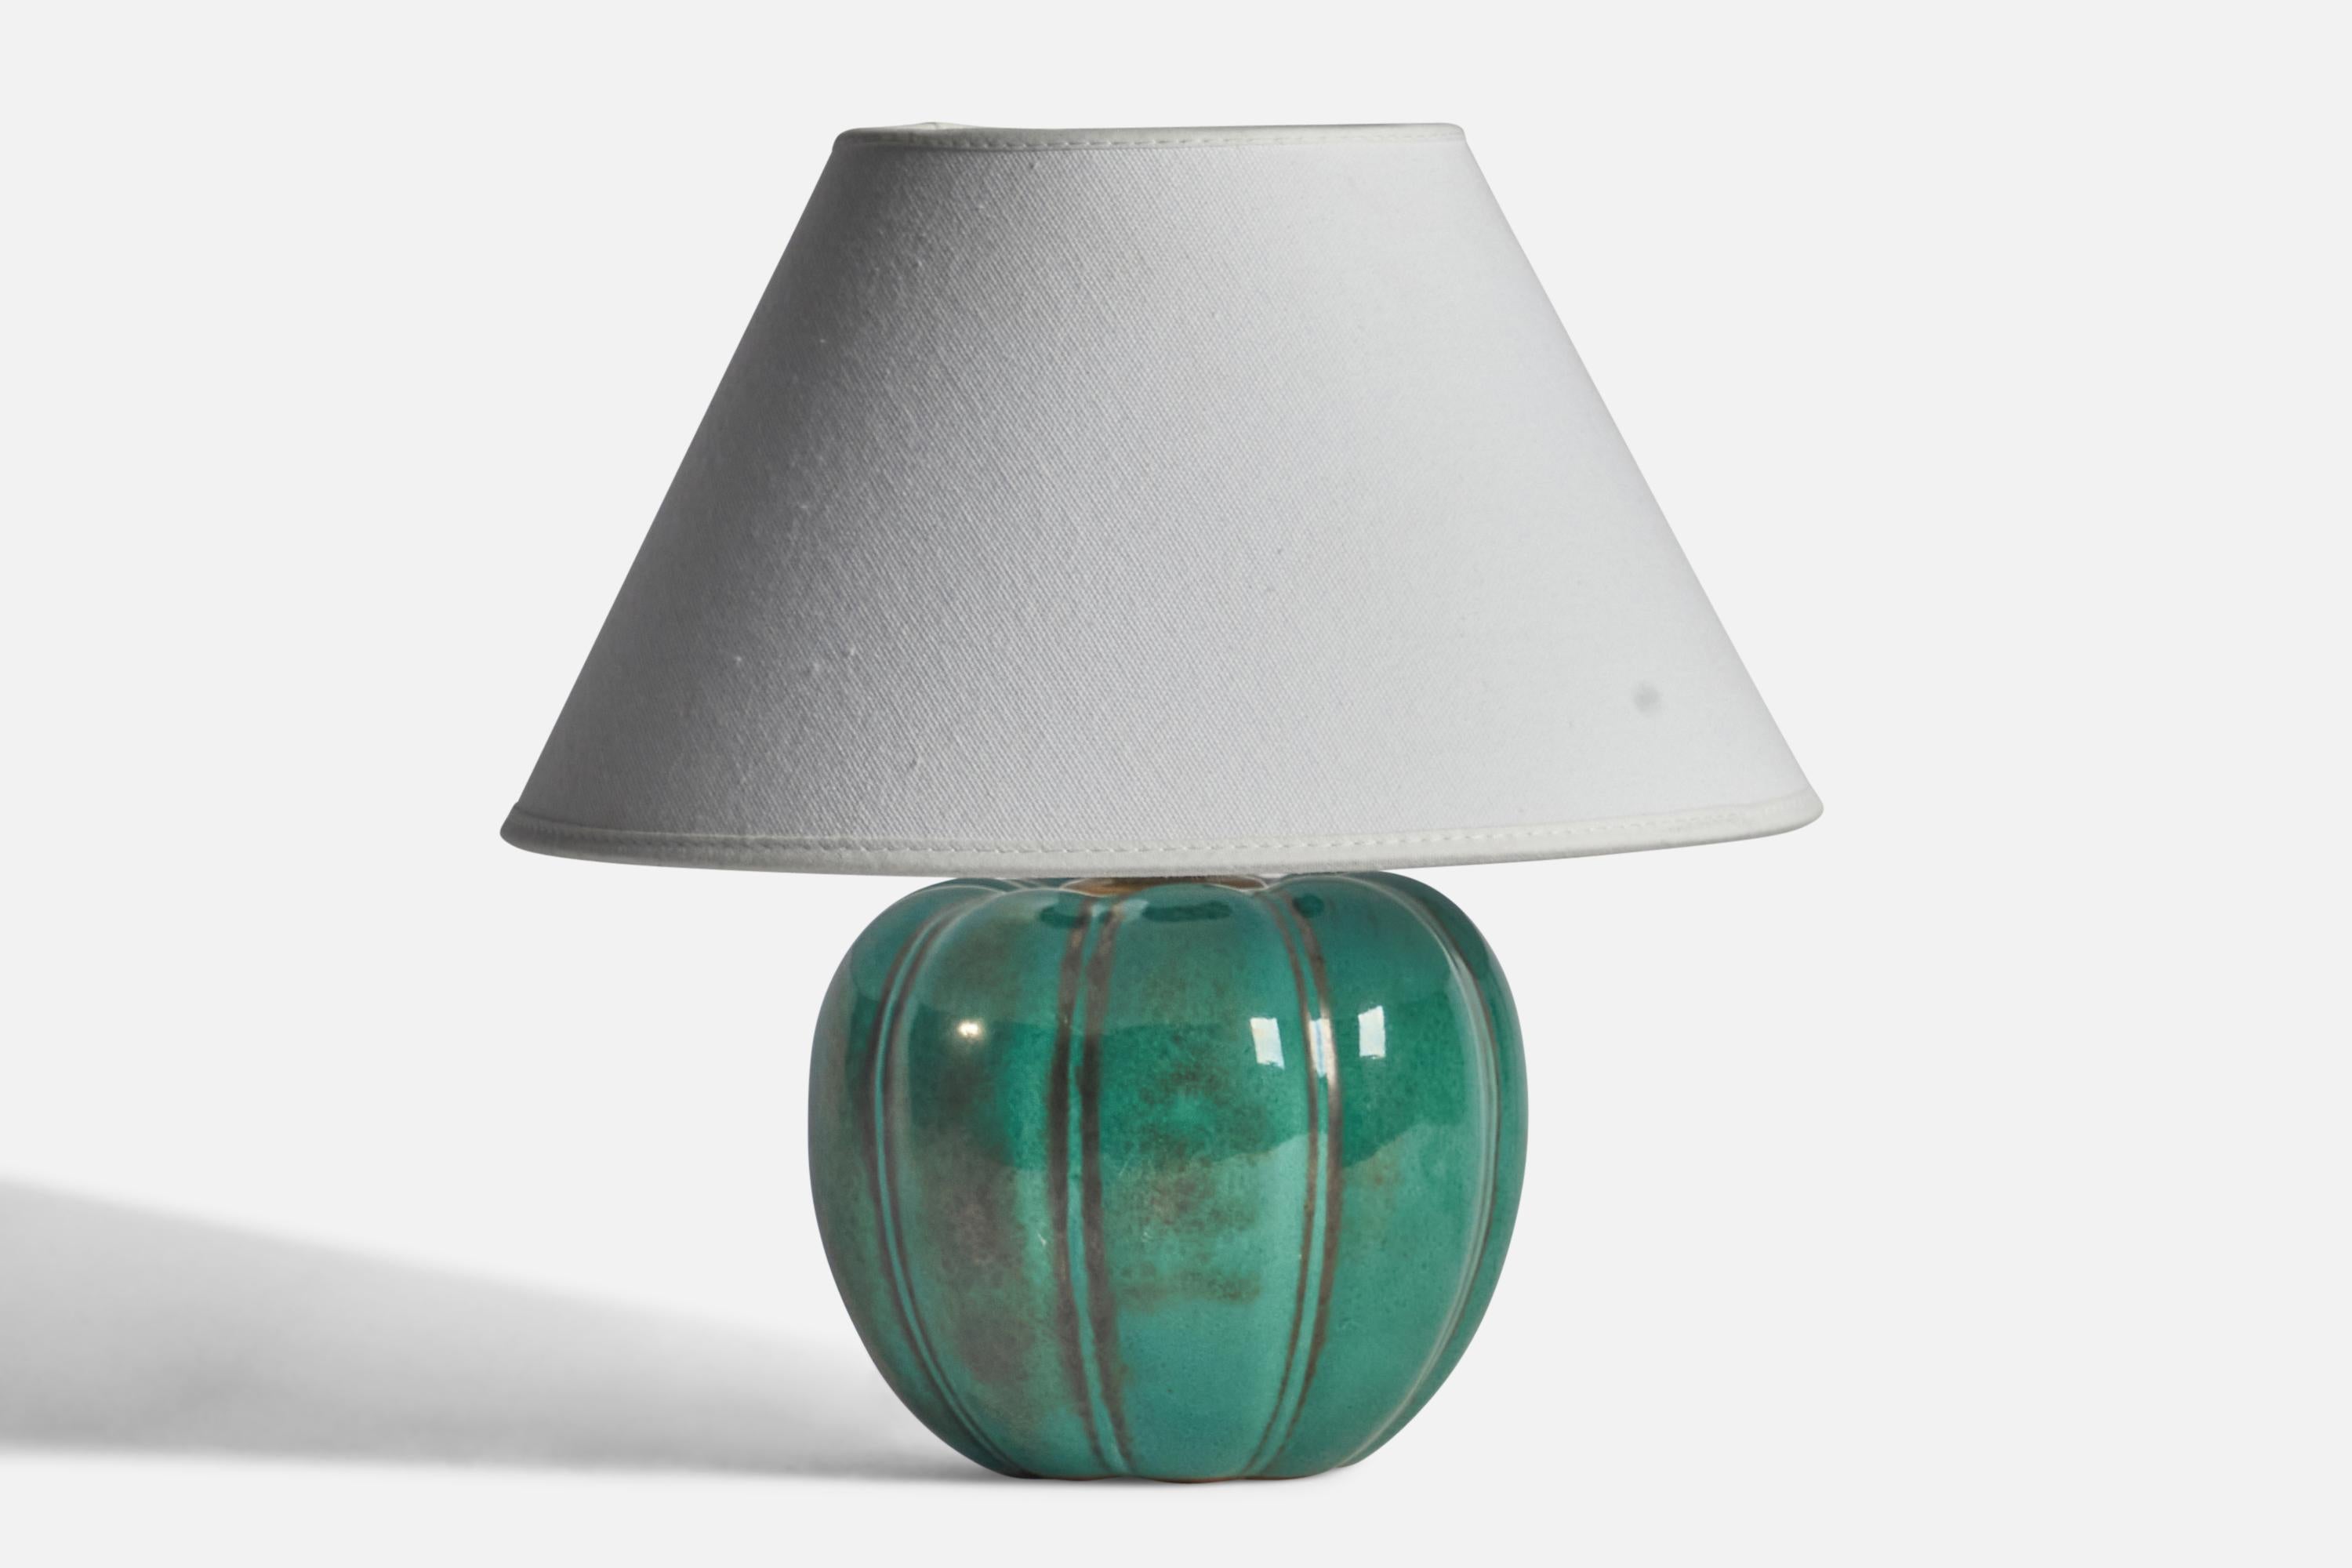 A green-glazed fluted stoneware table lamp designed and produced by Upsala Ekeby, Sweden, 1930s.

“EKEBY 321” stamp on bottom
Dimensions of Lamp (inches): 7.25” H x 5.5” Diameter
Dimensions of Shade (inches): 4.25” Top Diameter x 9.75” Bottom